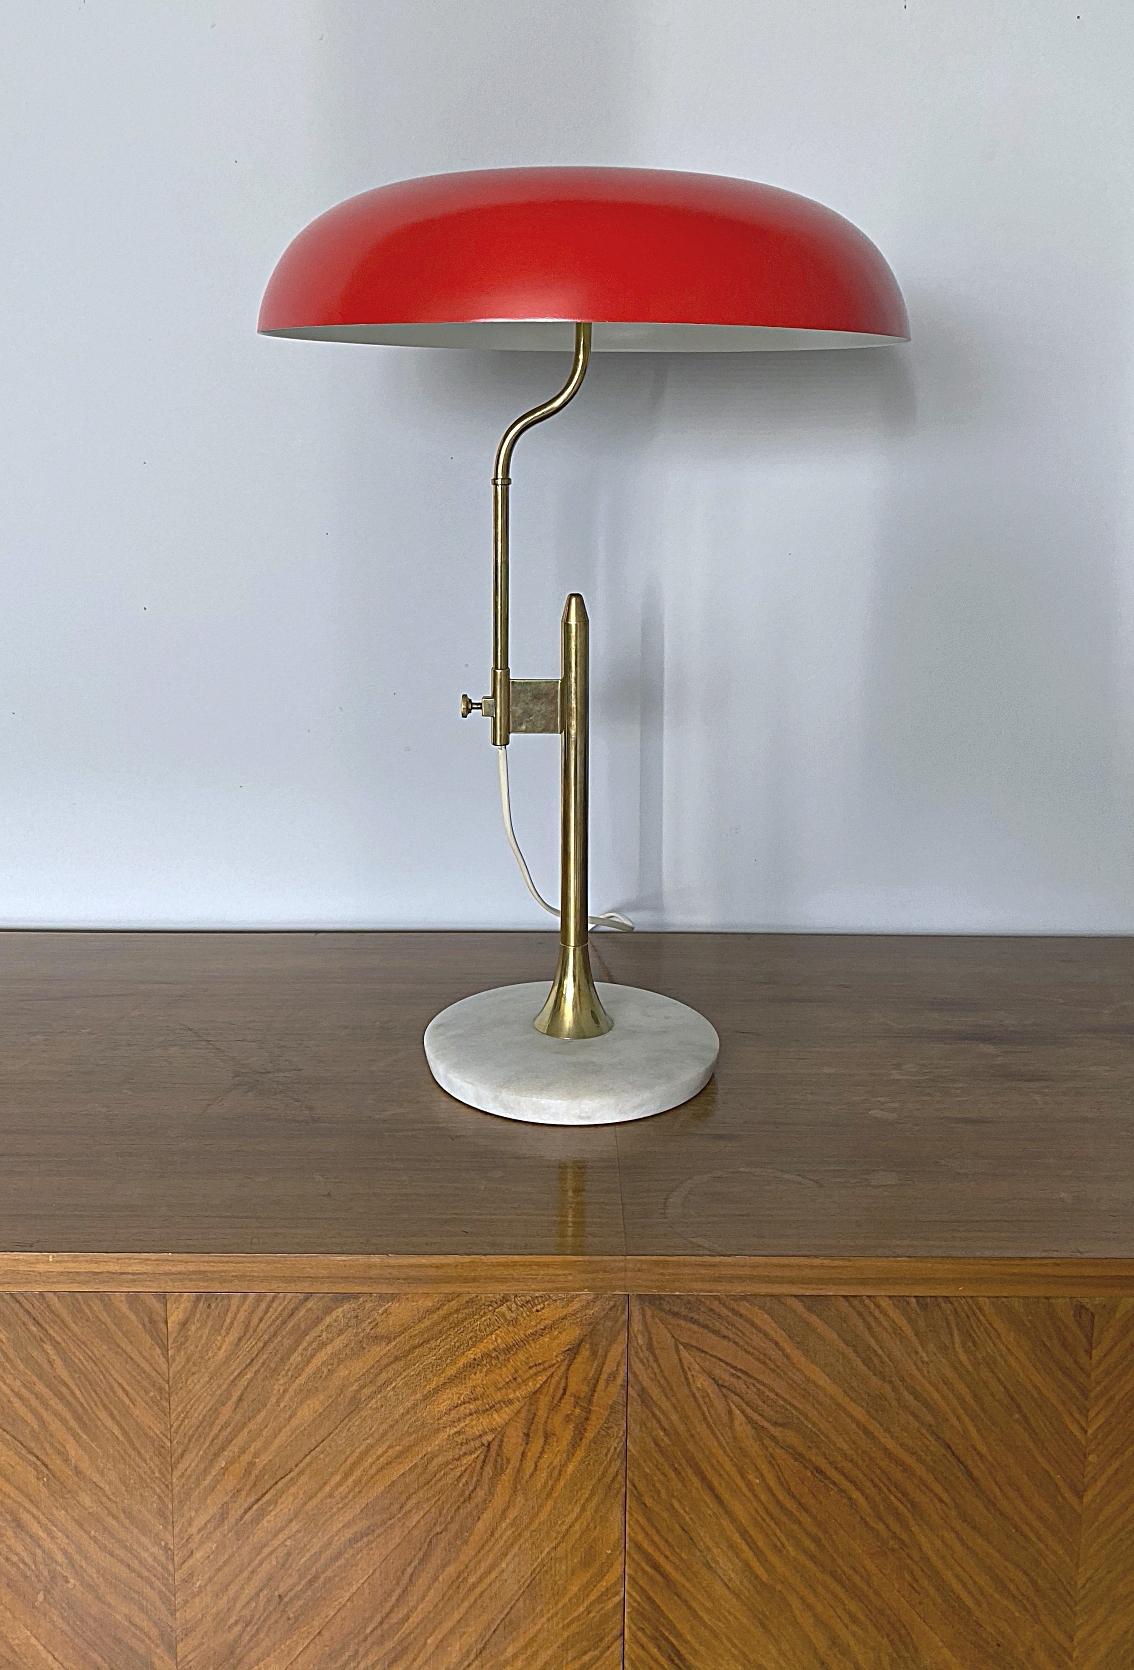 Iconic midcentury desk lamp made of brass with red shade and Carrara marble base. Minimalistic design from the 1950s - big round shade that provides beautiful light. Excellent condition without bumps or dents. Fully newly rewired and tested